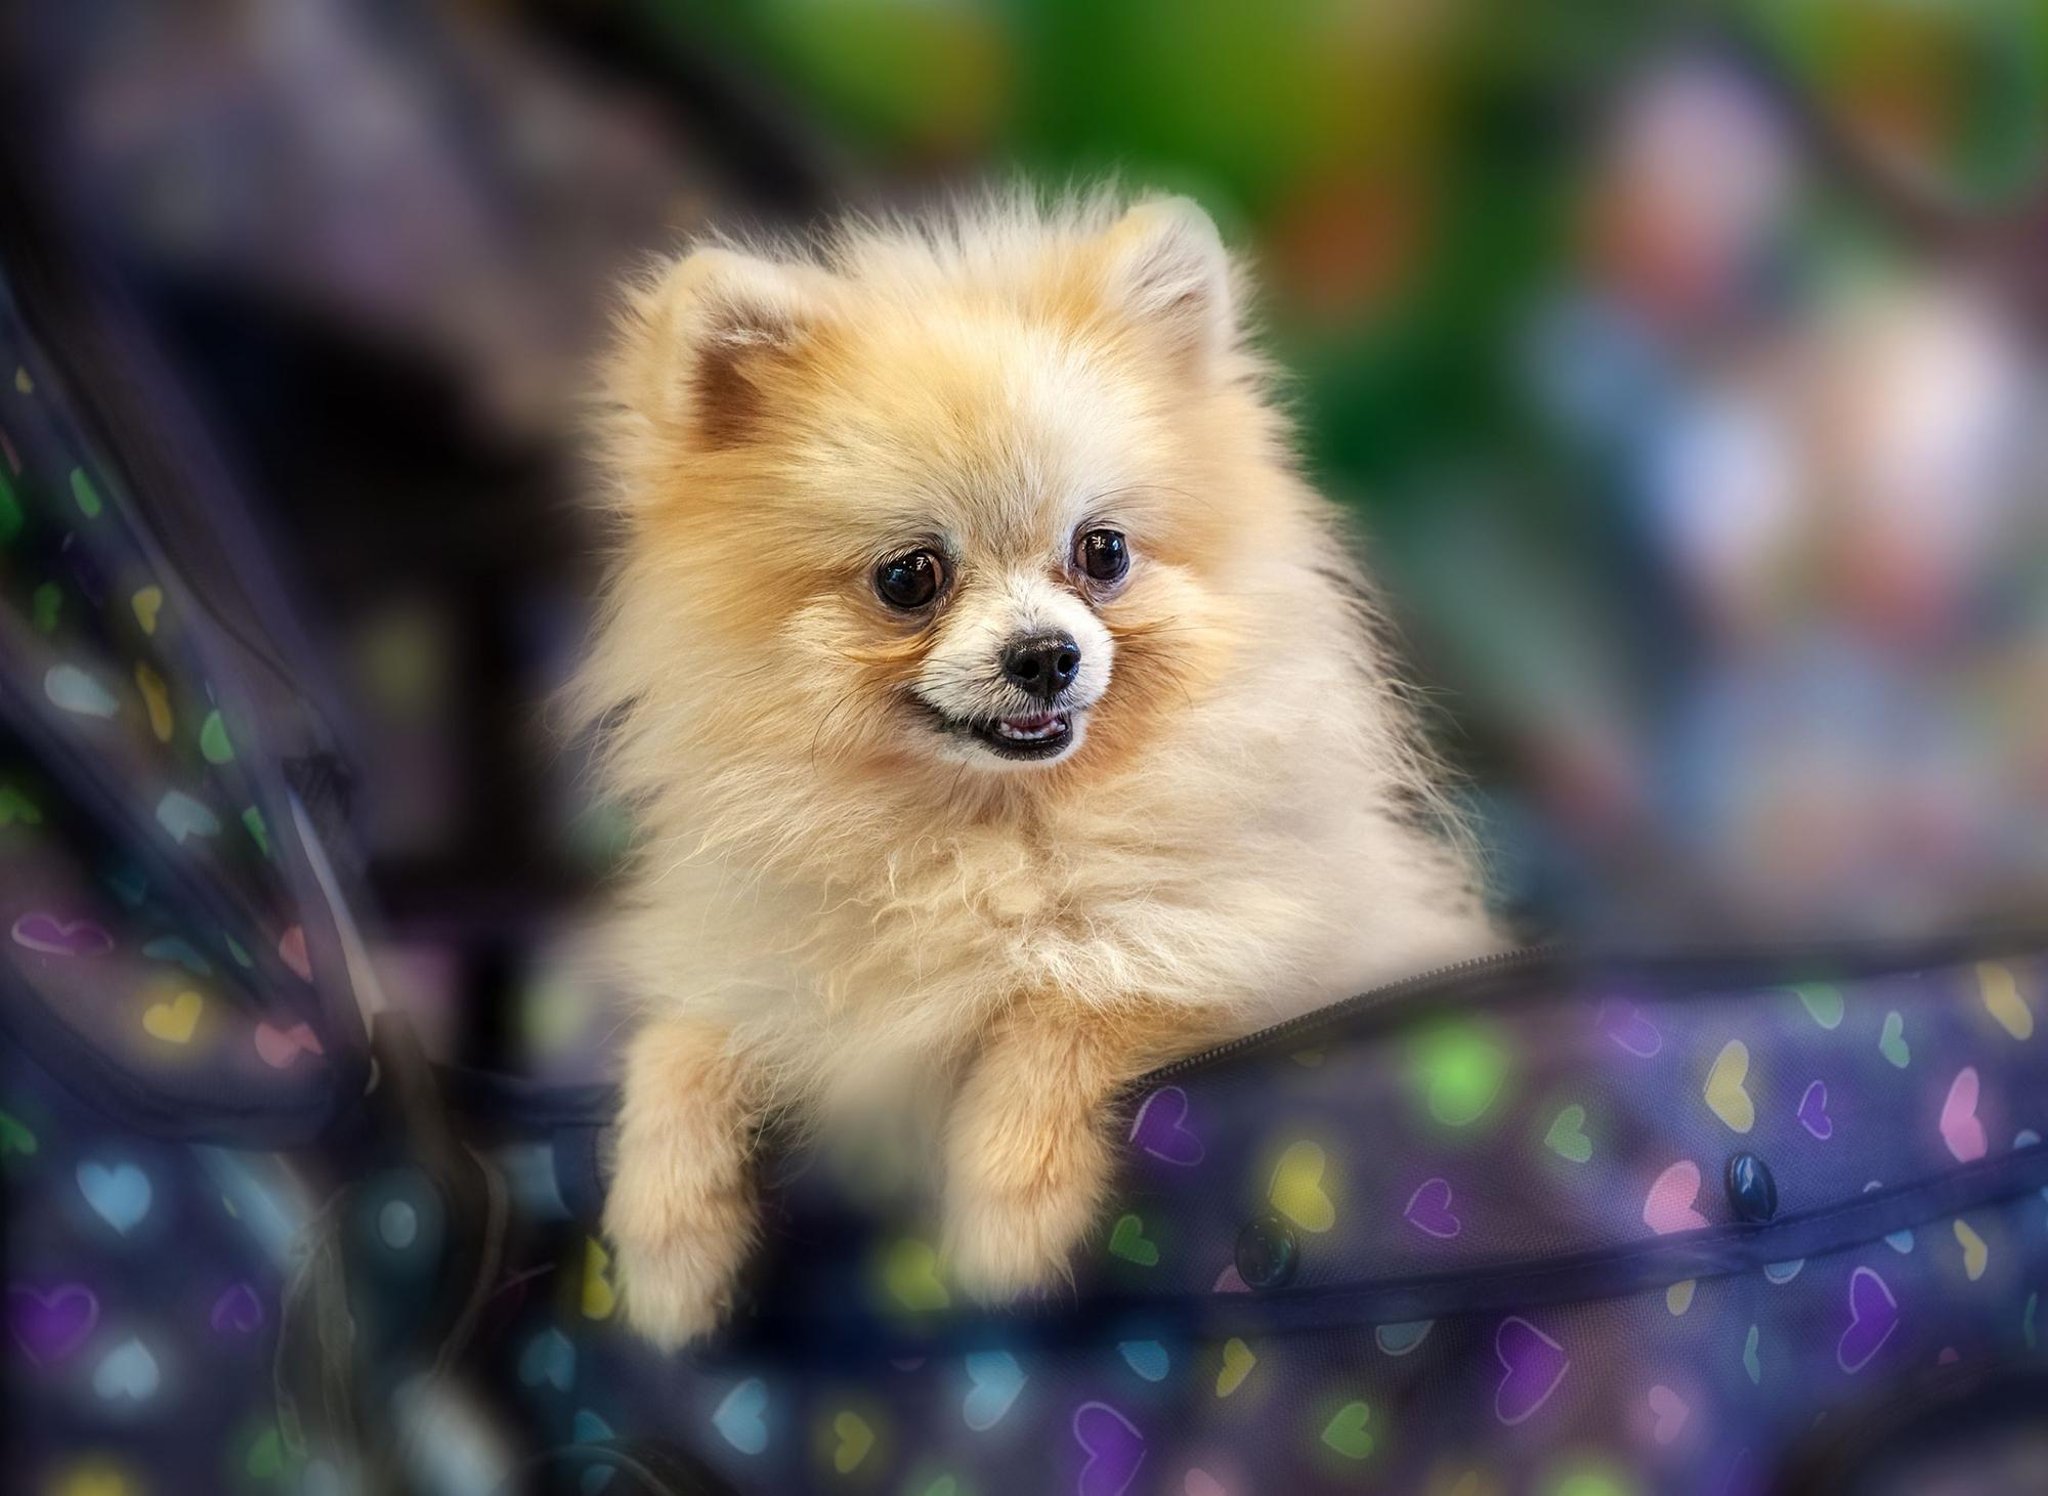 Centimeter Peer Egenskab Here are 10 fun dog facts you should know about the adorable Pomeranian |  The Scotsman